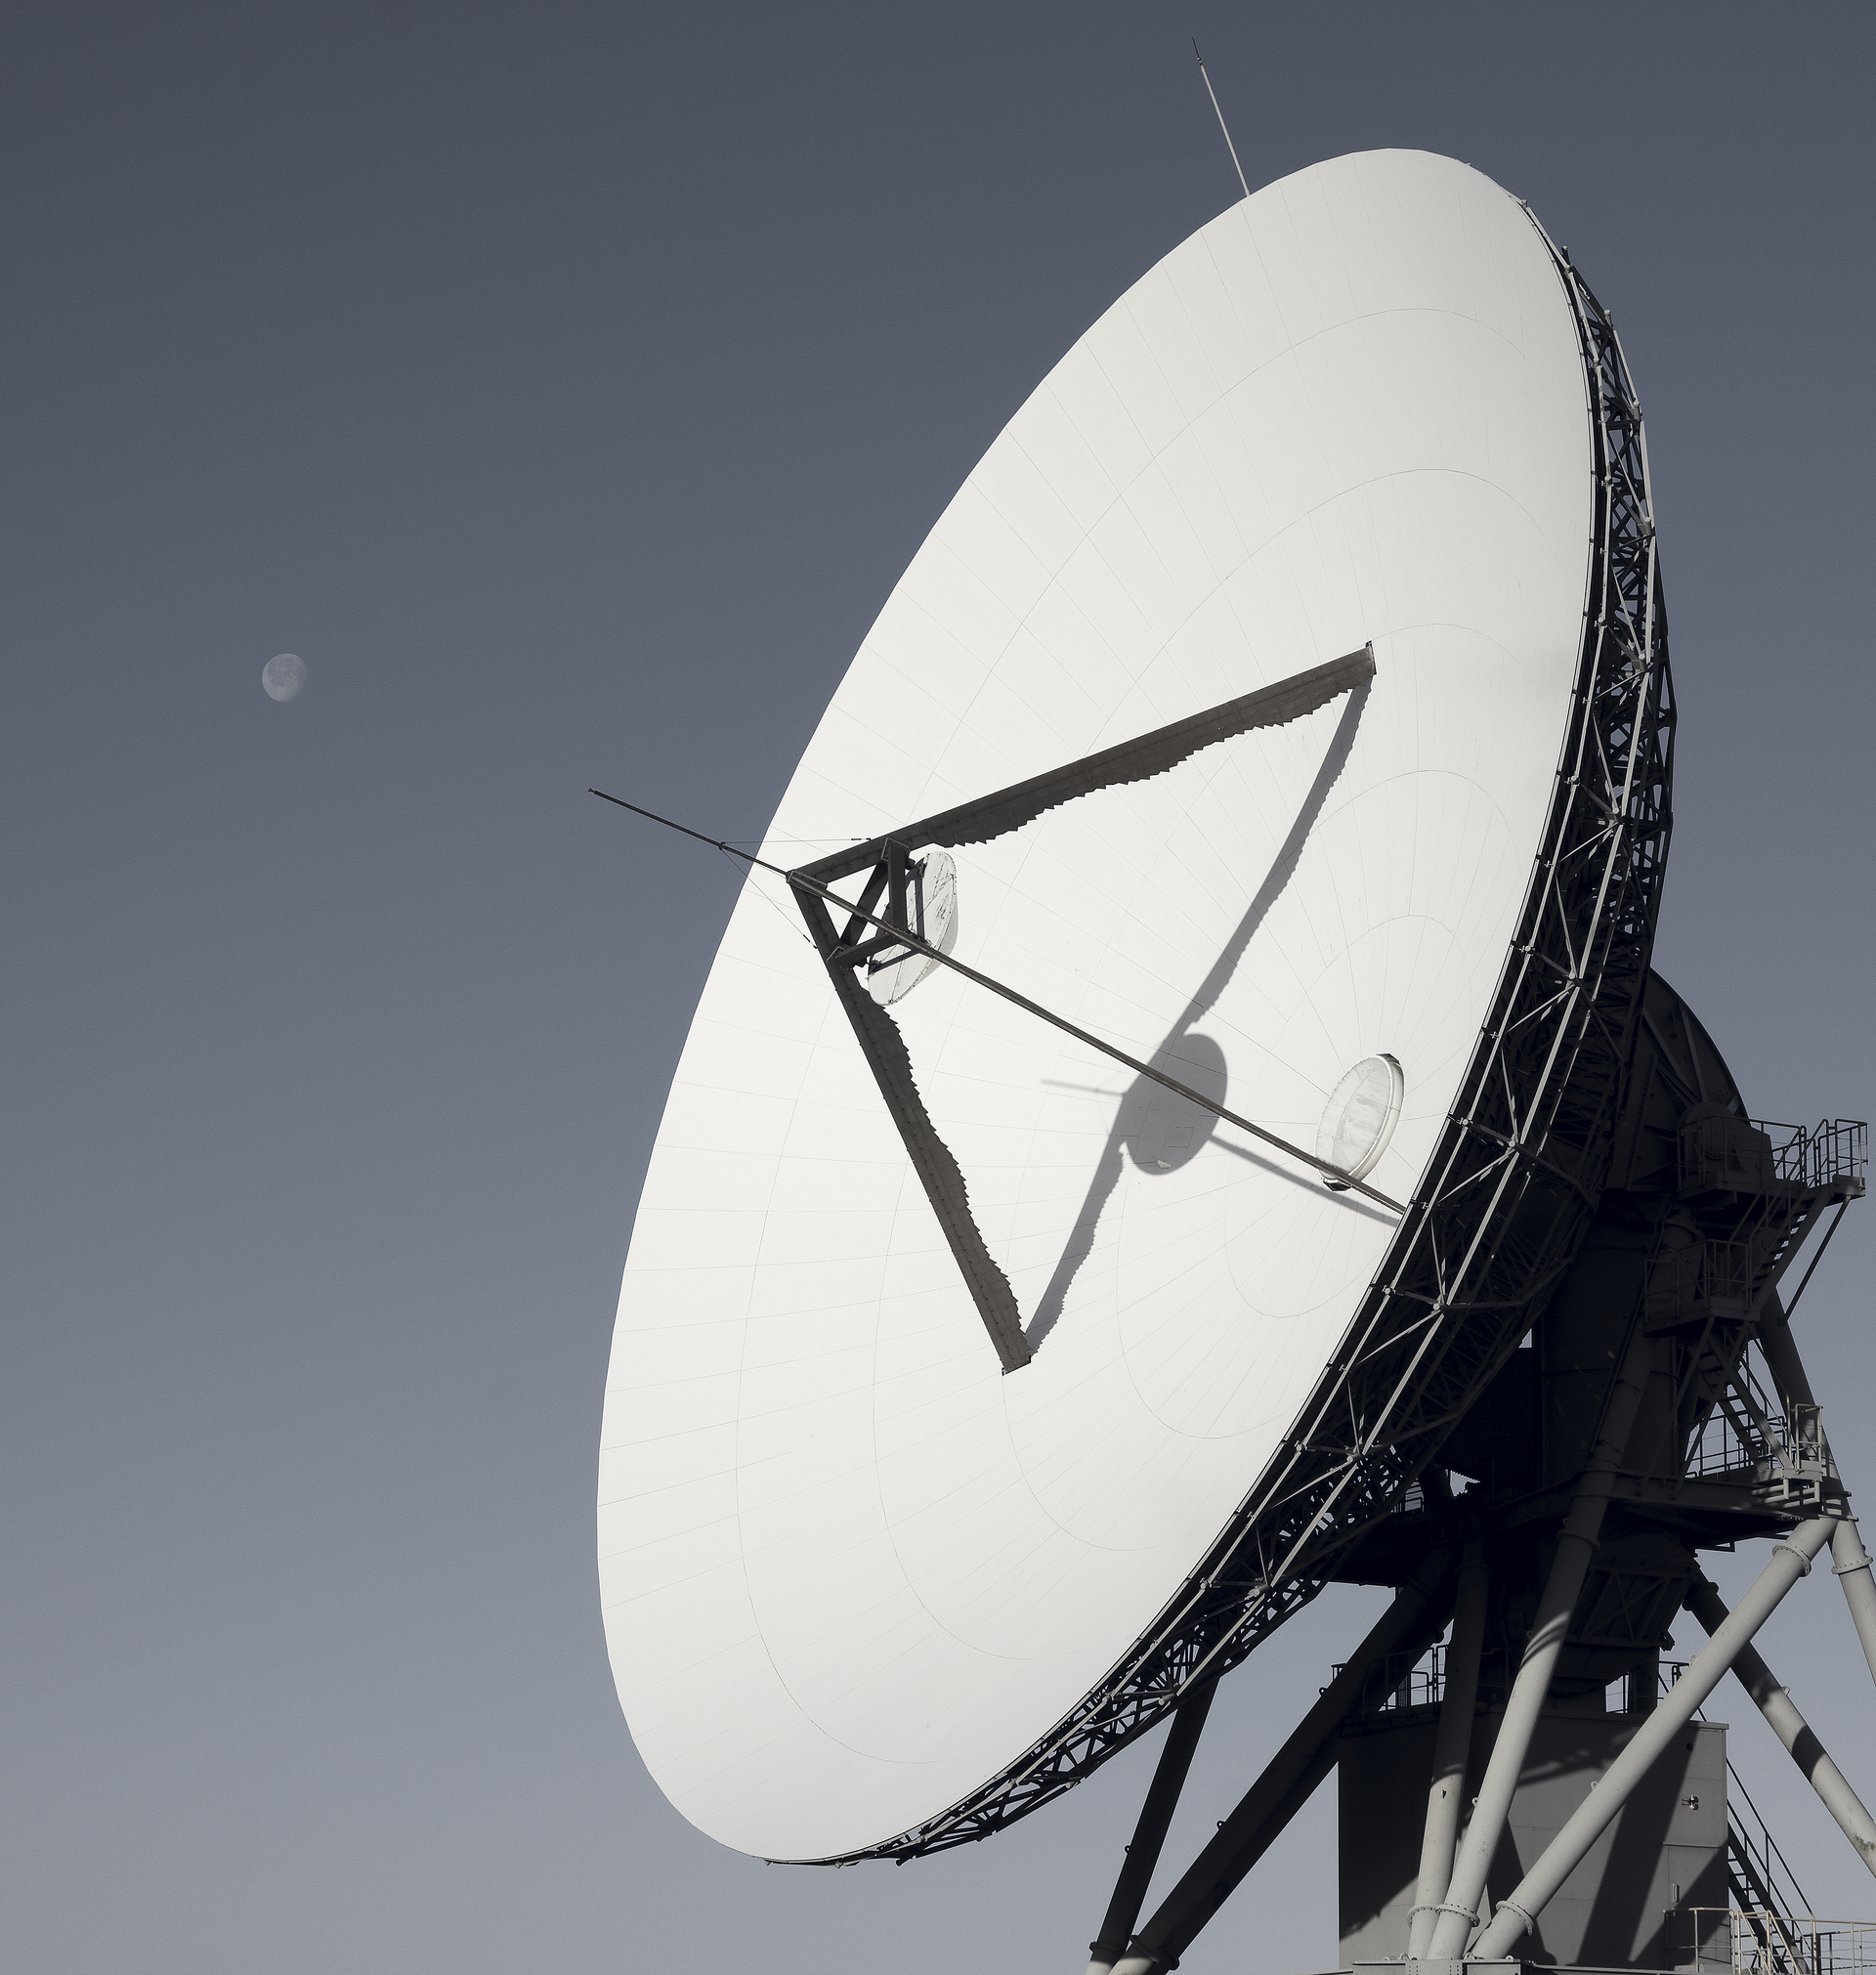 A picture of Goonhilly Earth Station Ltd's Deep Space Communications Antenna, GHY-6, and the Moon